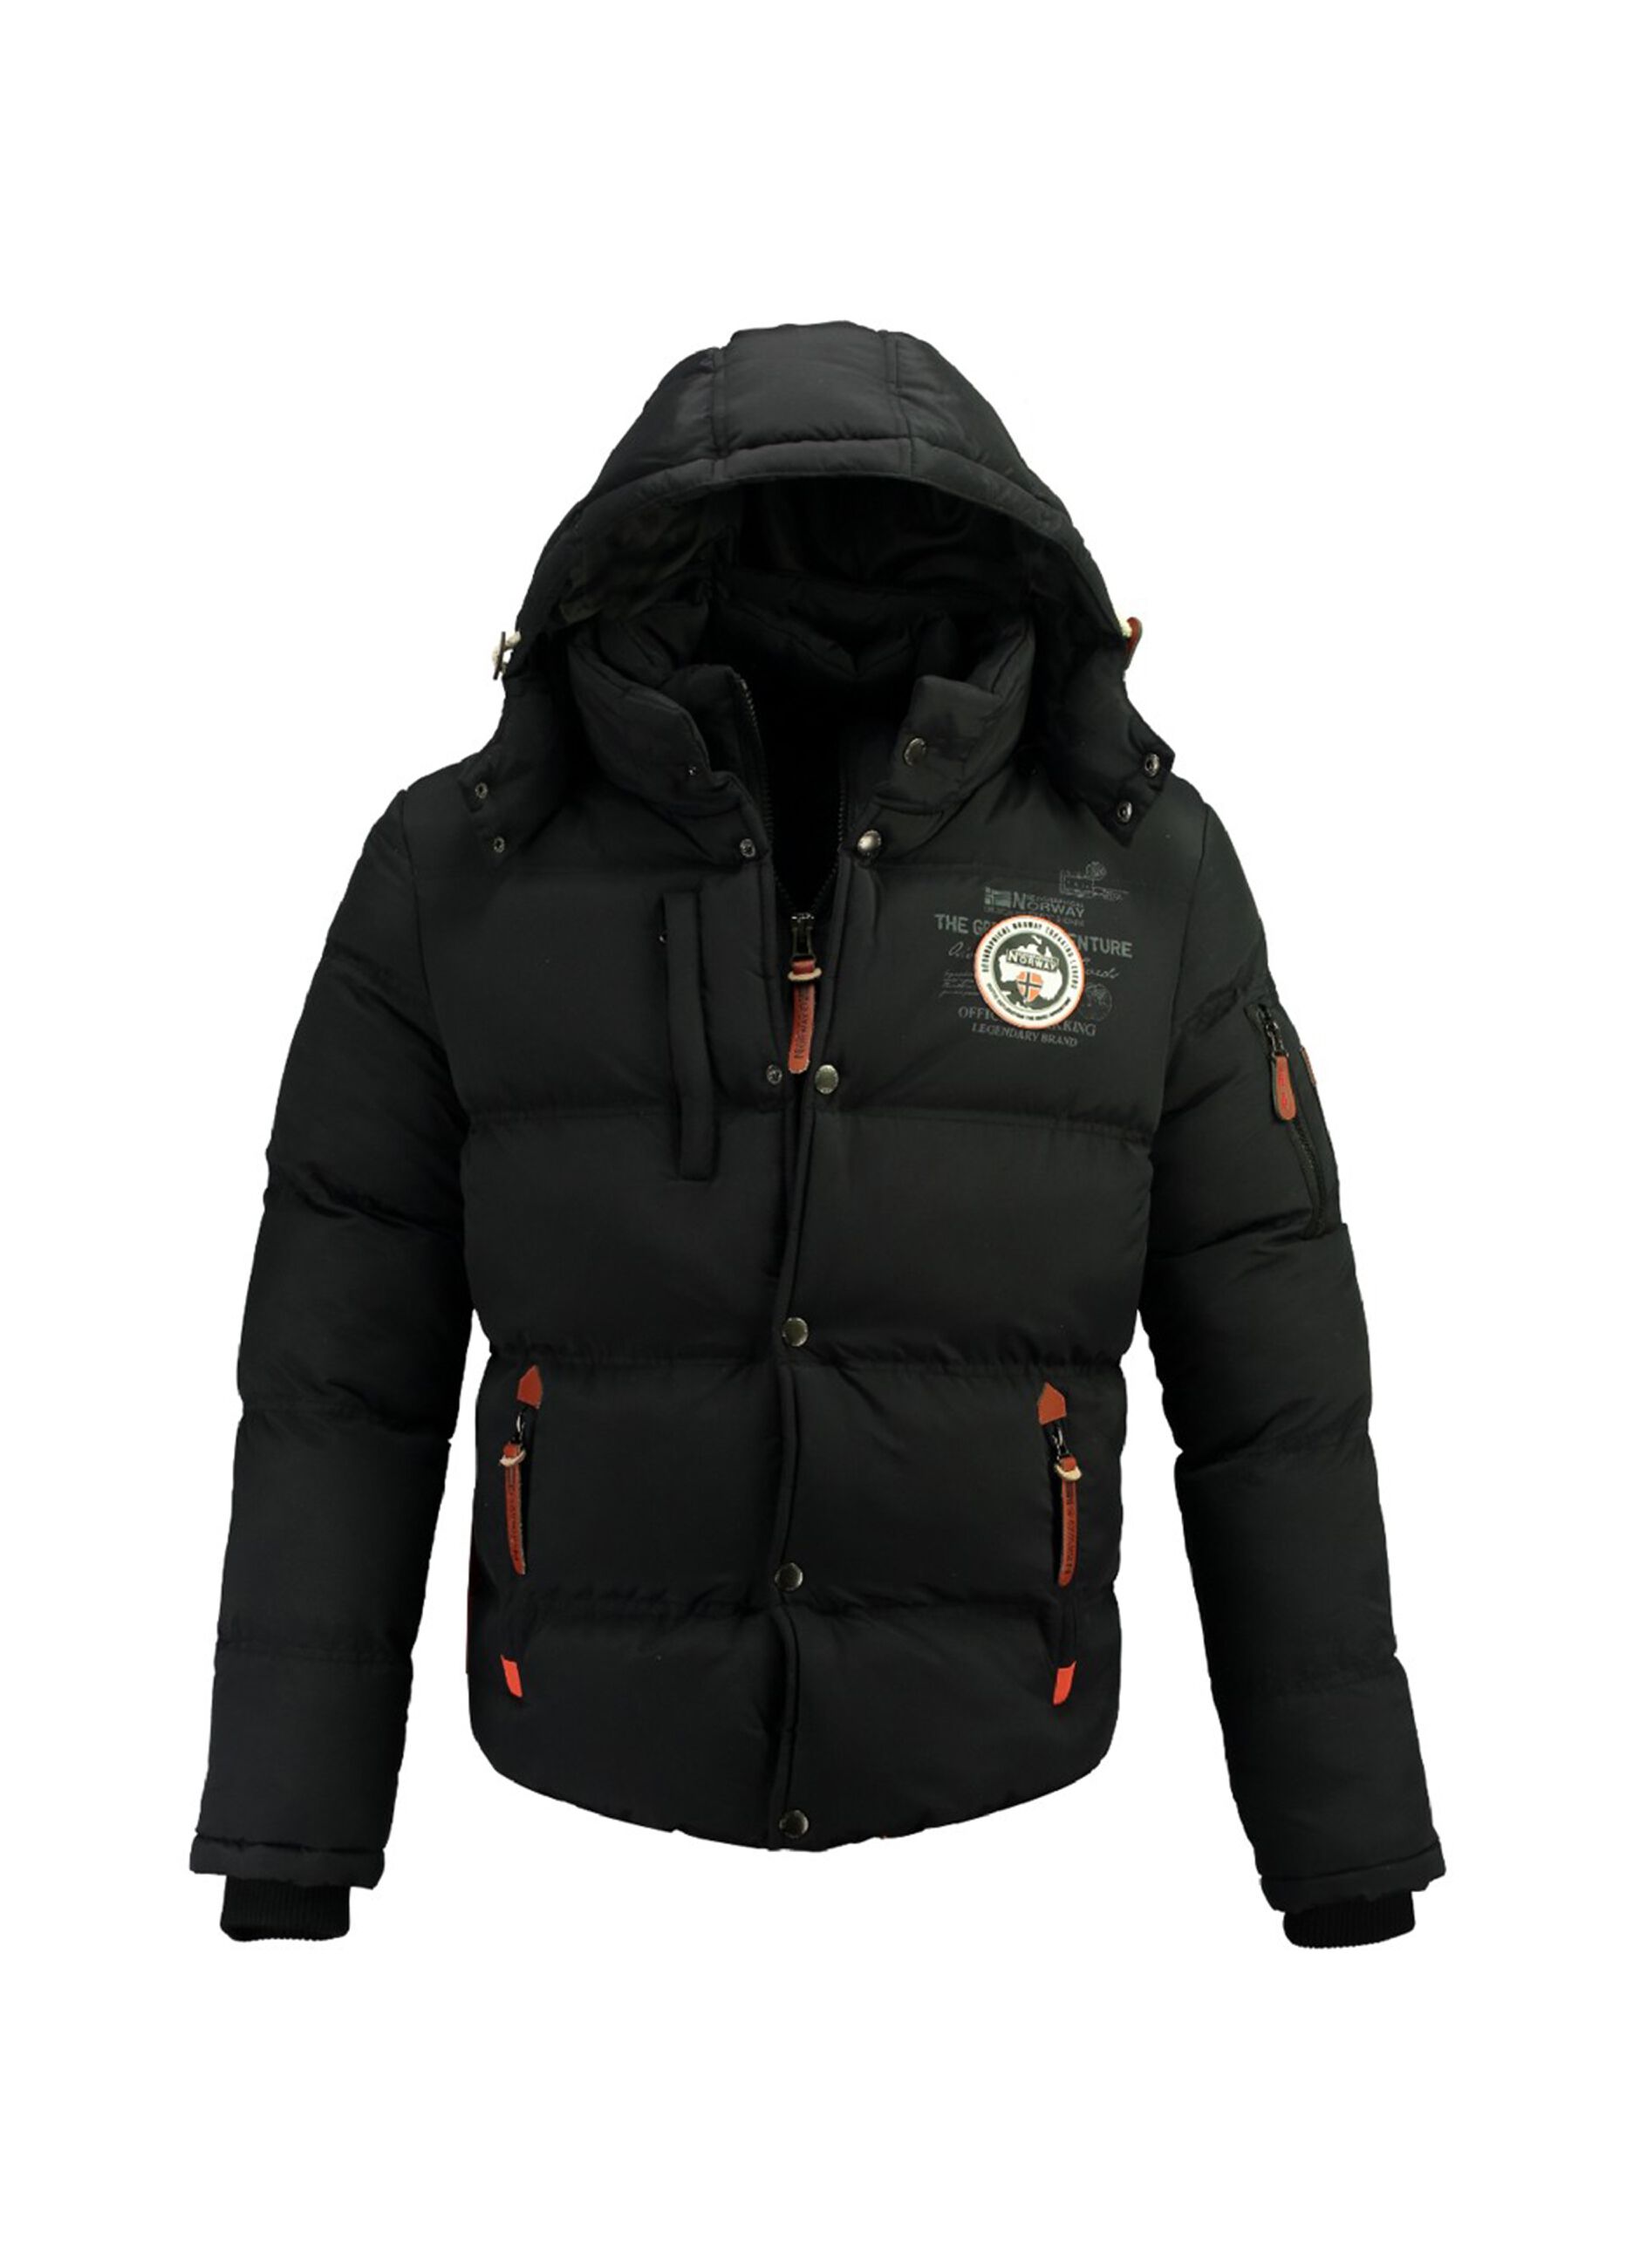 GEOGRAPHICAL NORWAY Man's Black Geographical Norway down jacket with  detachable hood